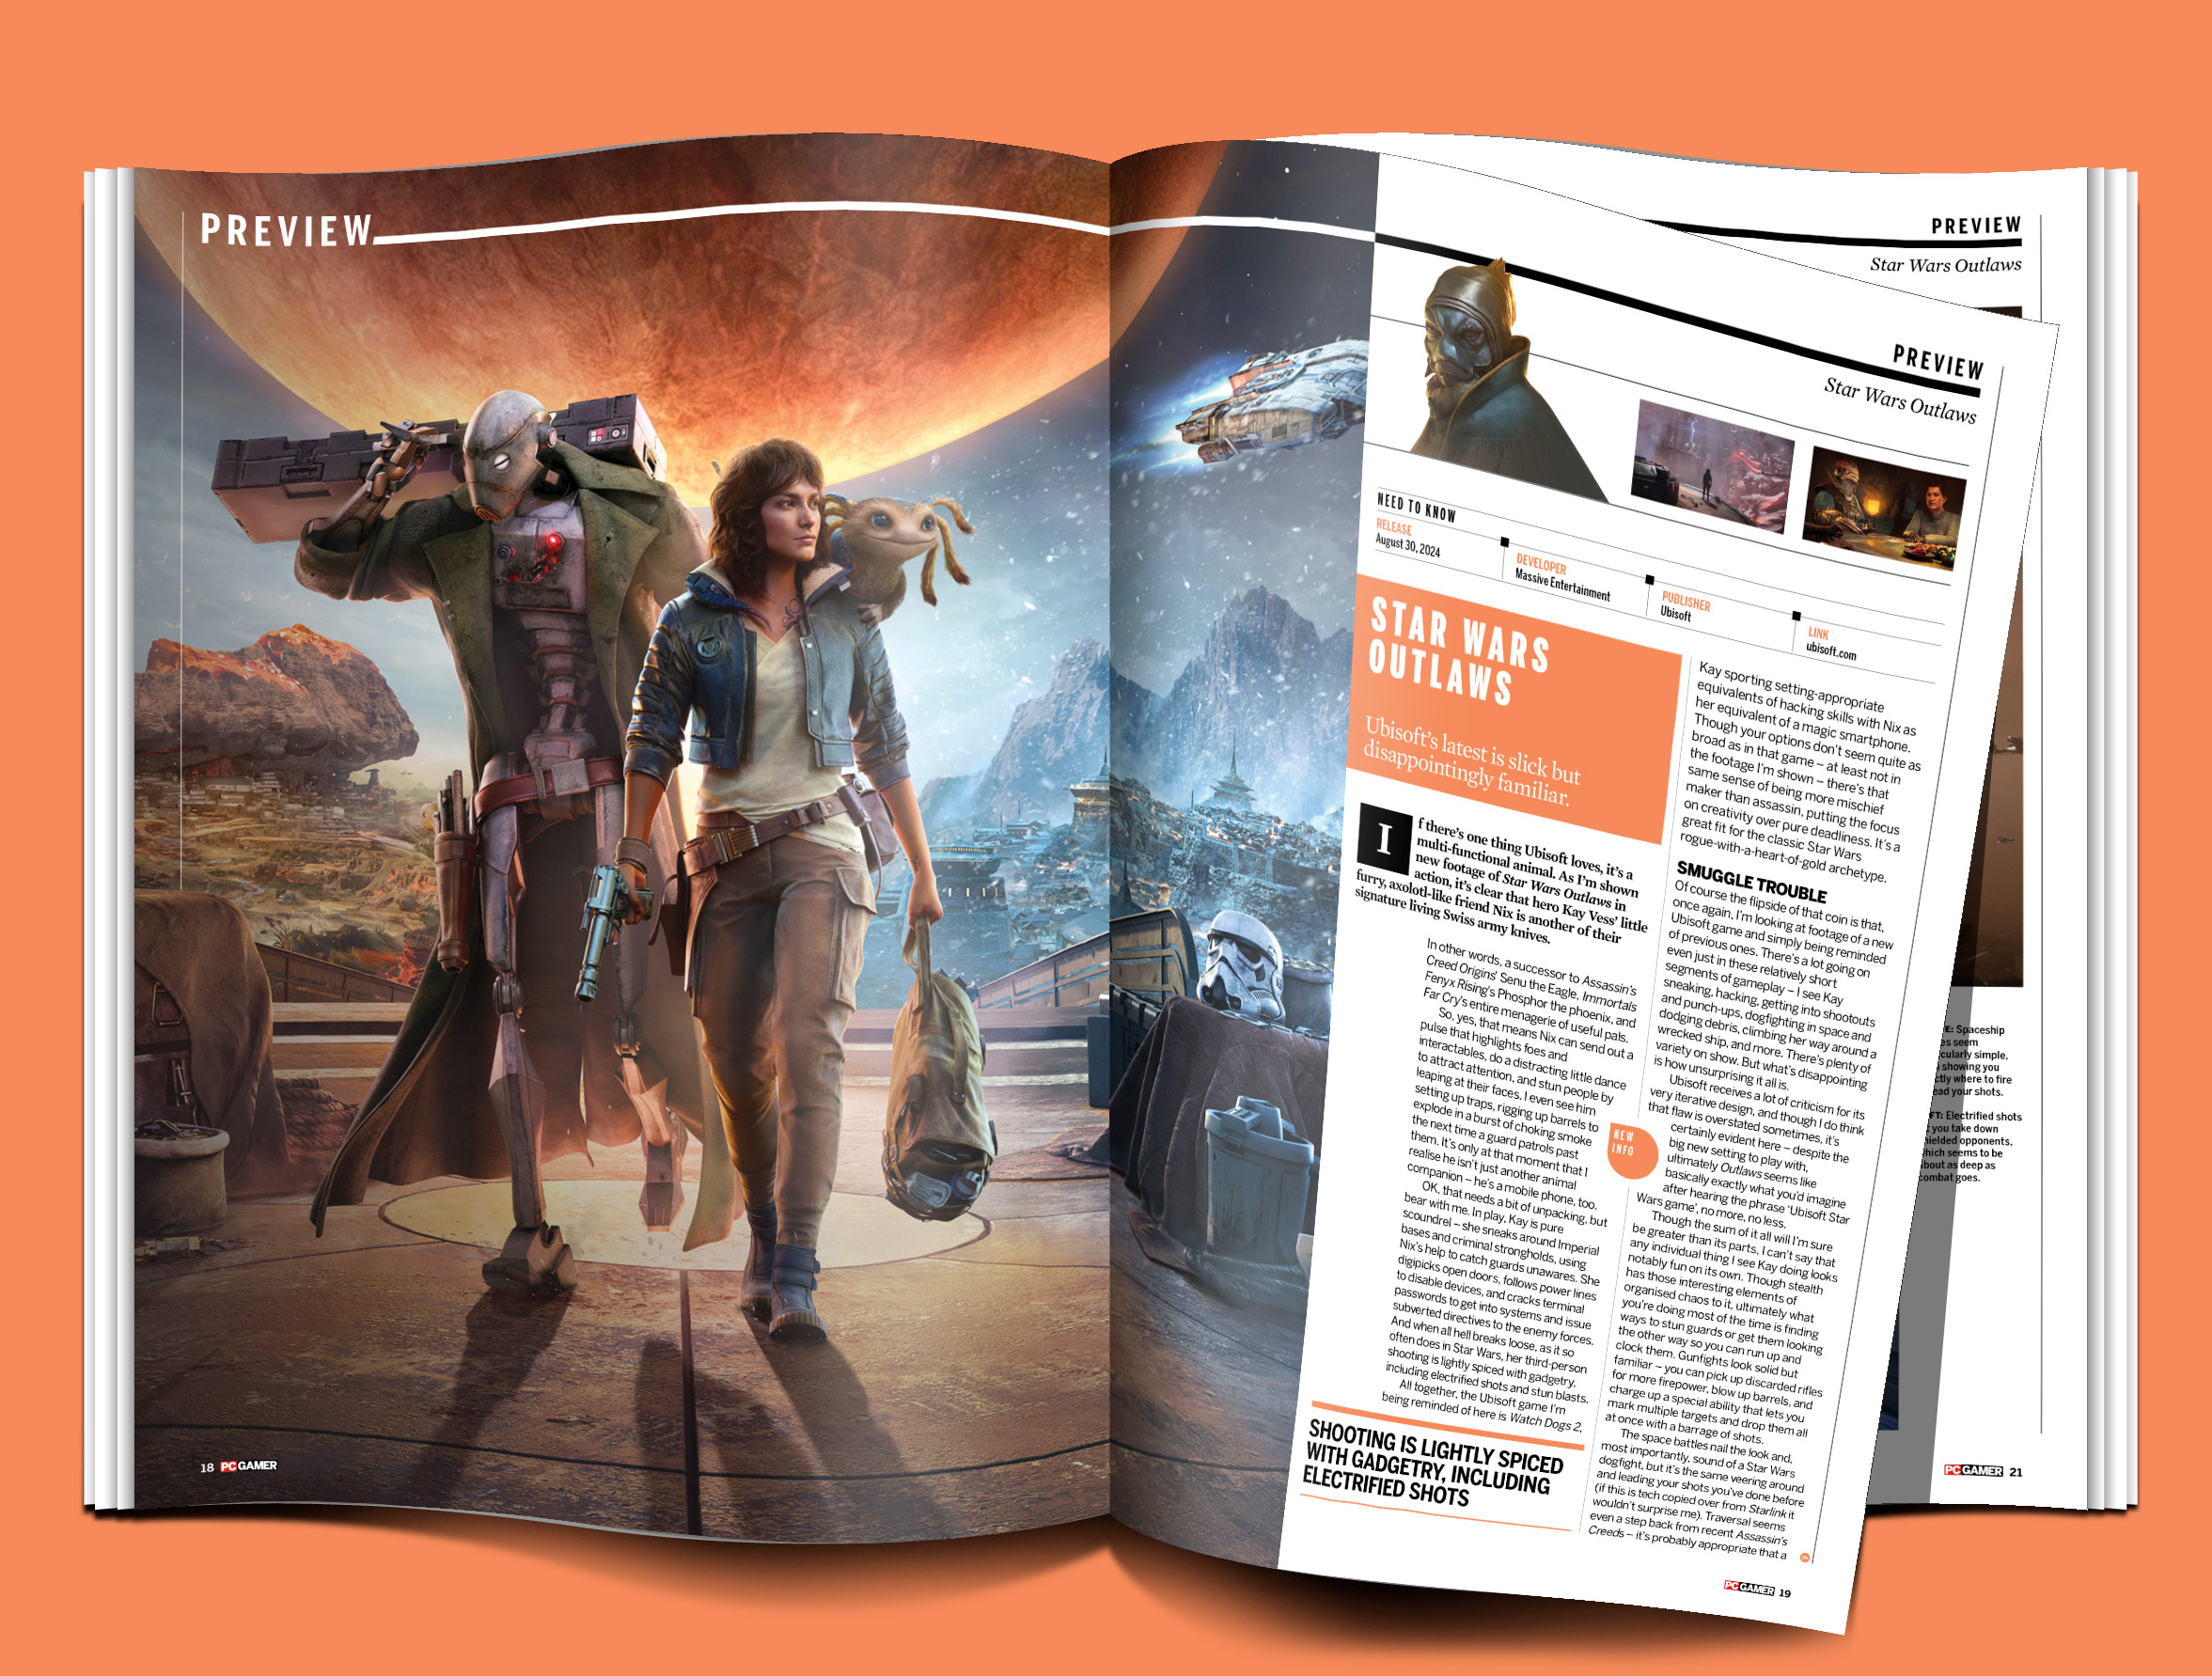 A PCG 399 feature on Star Wars: Outlaws